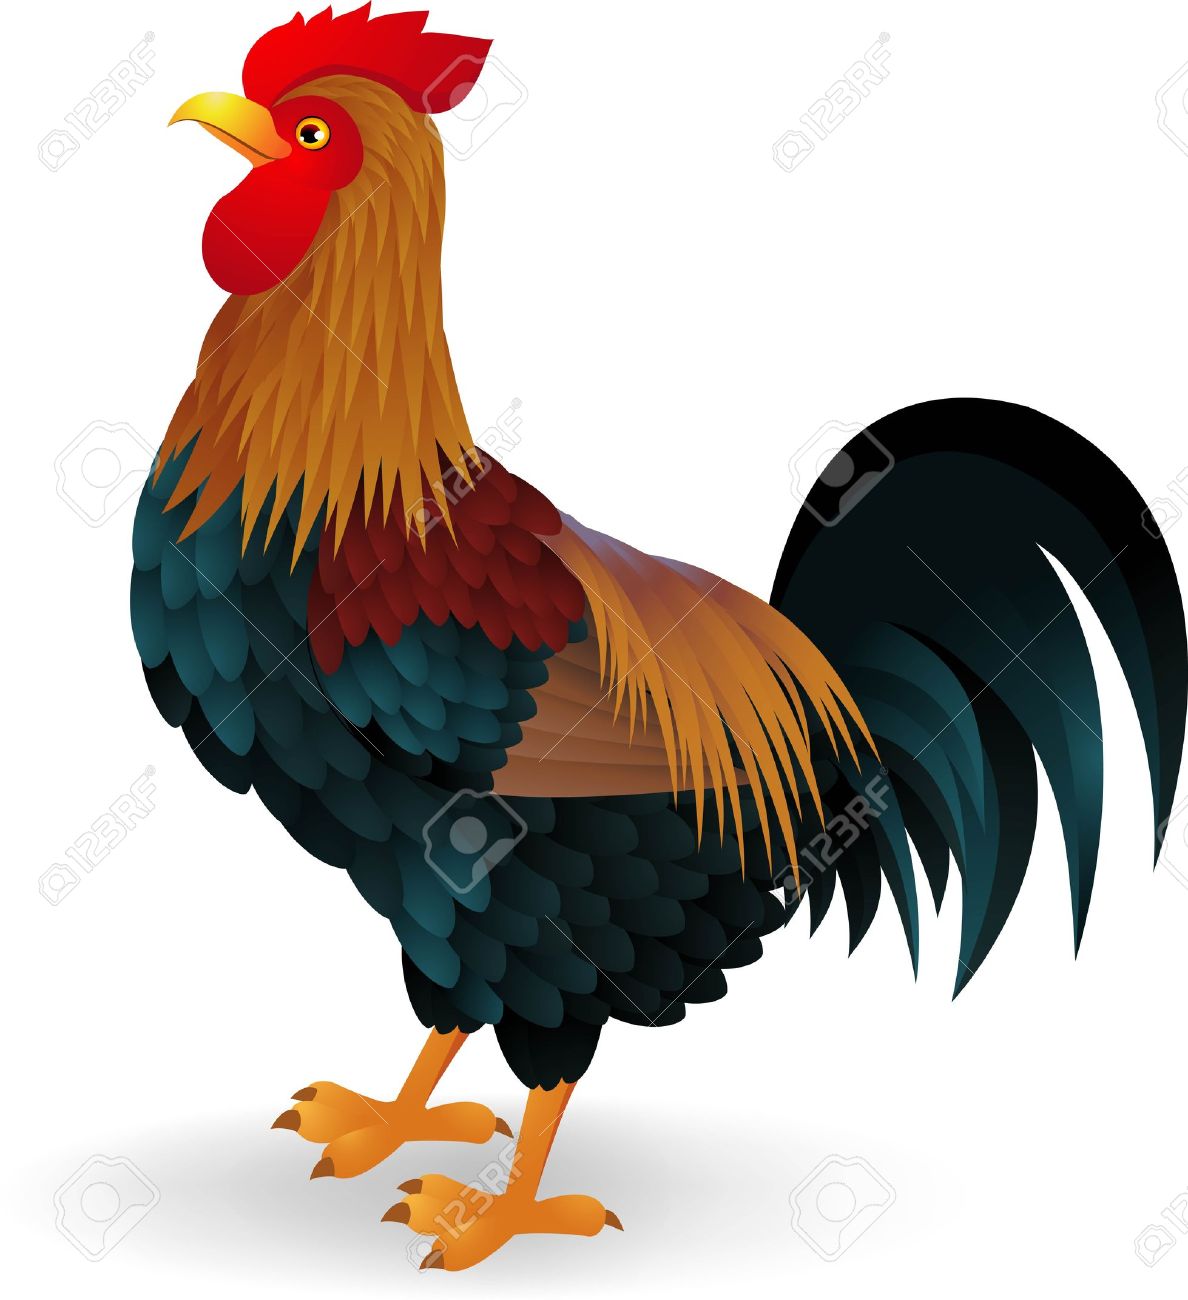 Rooster clipart #1, Download drawings